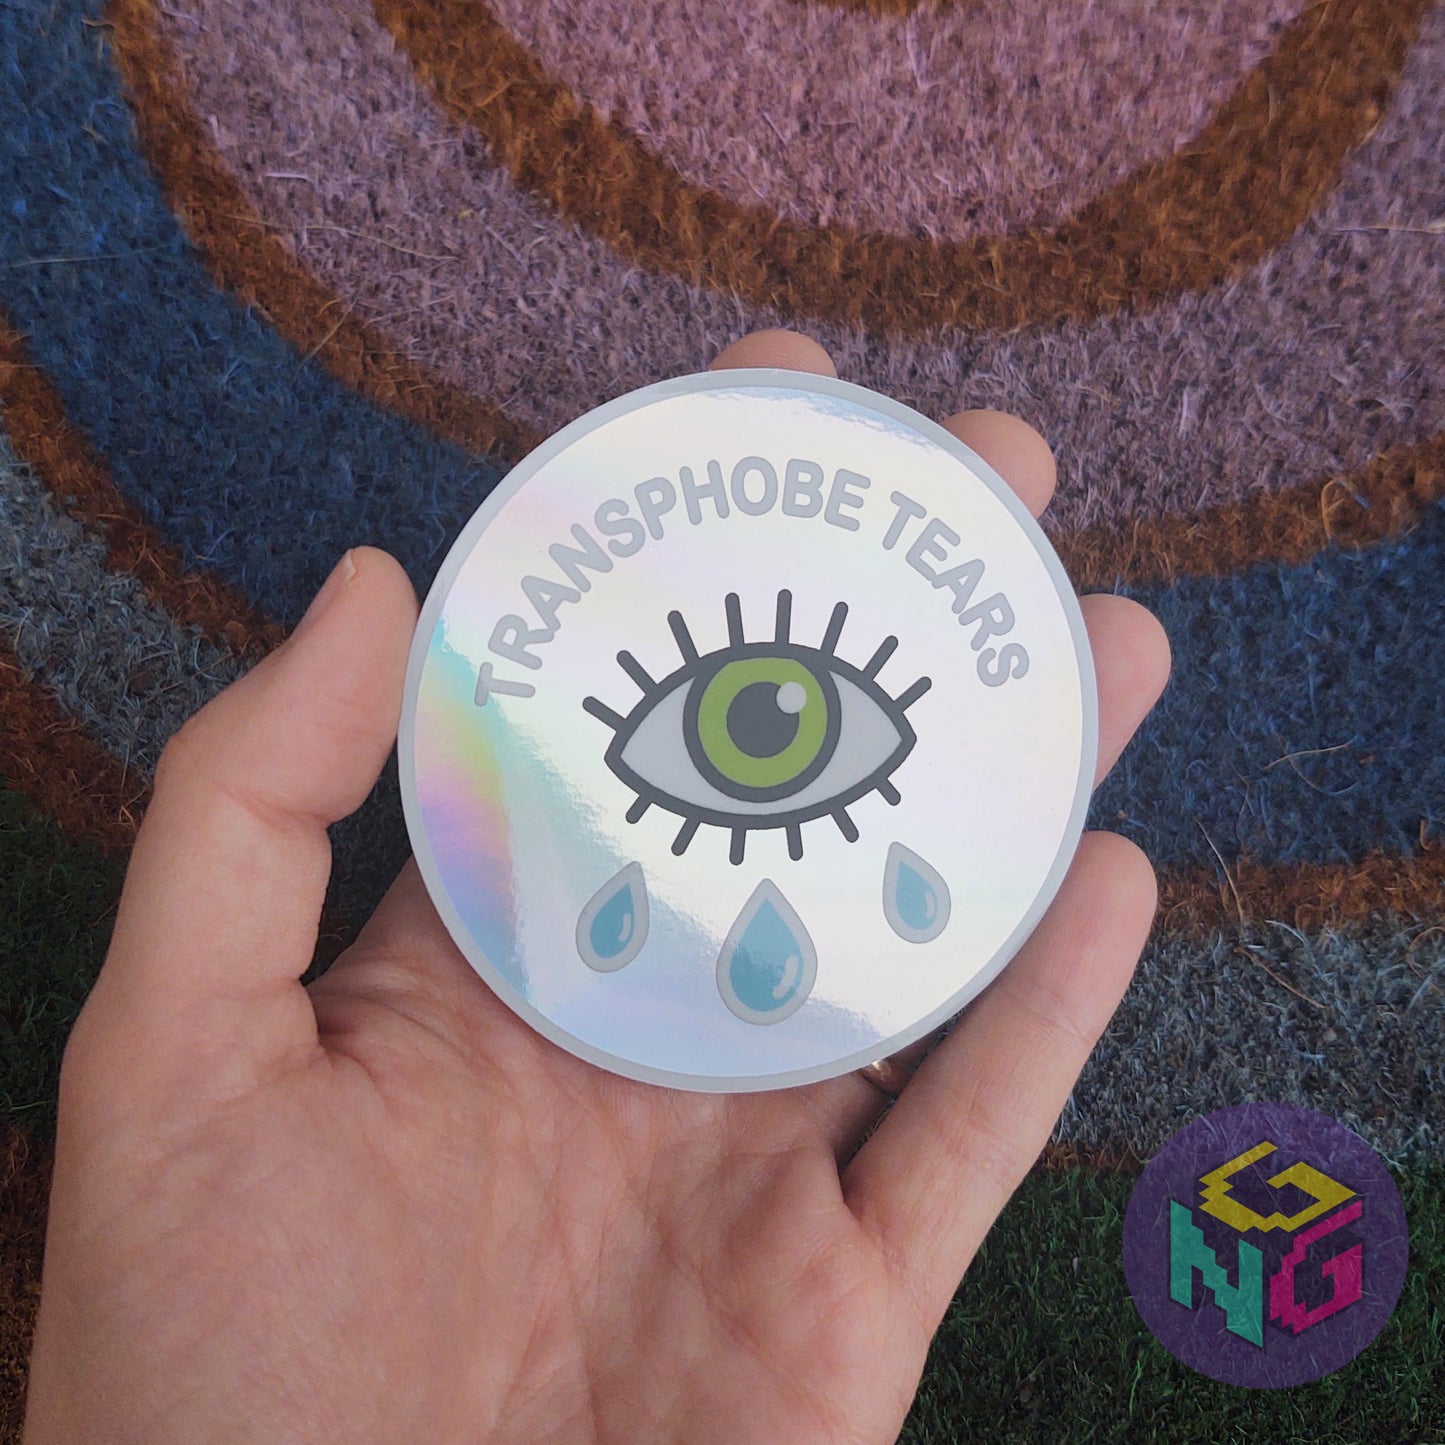 rainbow holographic transphobe tears sticker held in hand in front of rainbow welcome mat